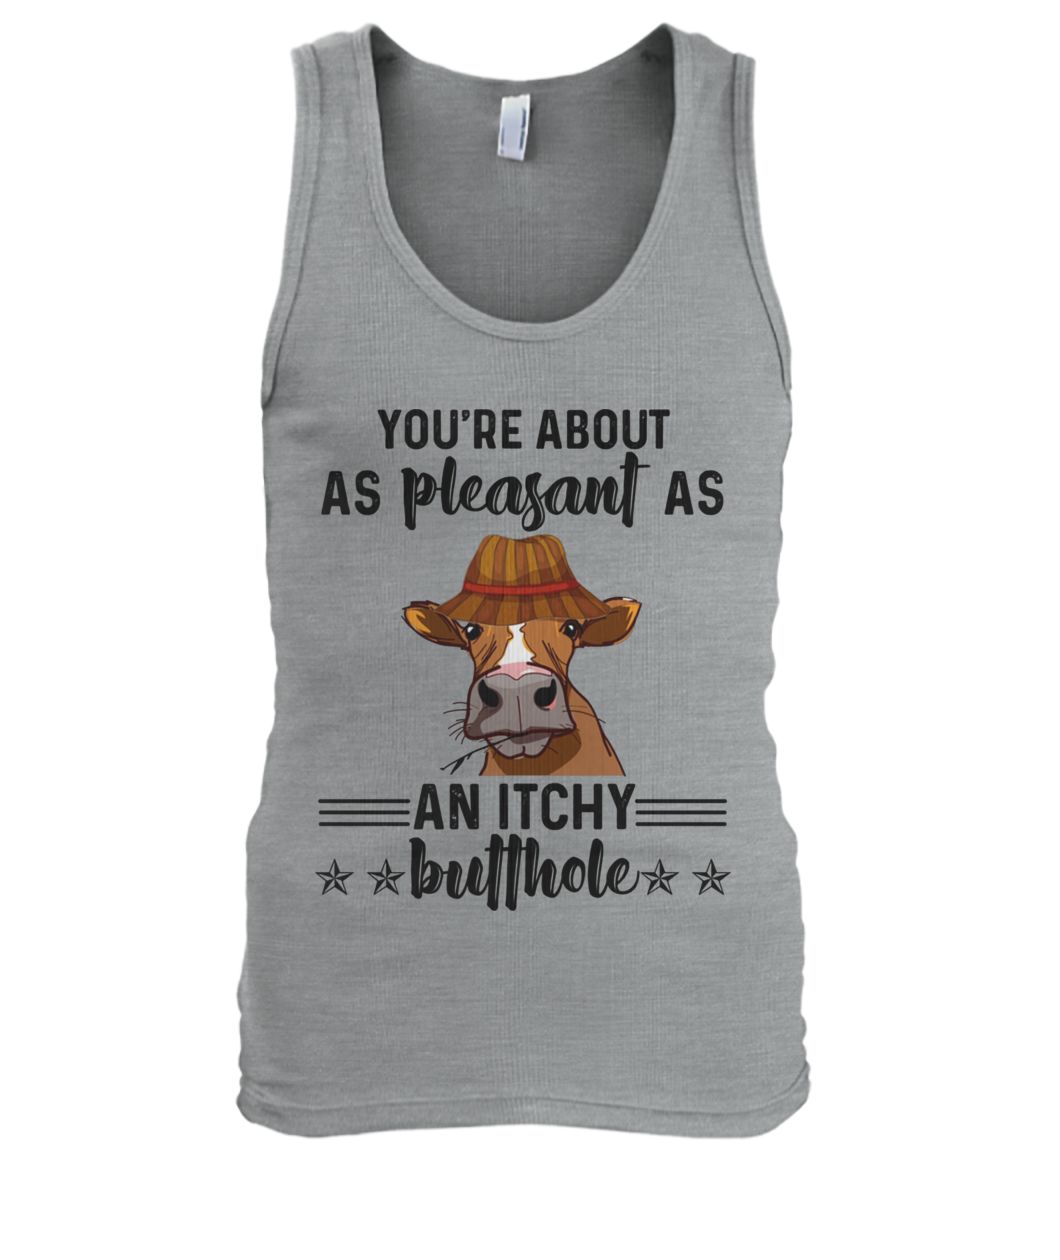 Cow you're about as pleasant as an itchy butthole tank top